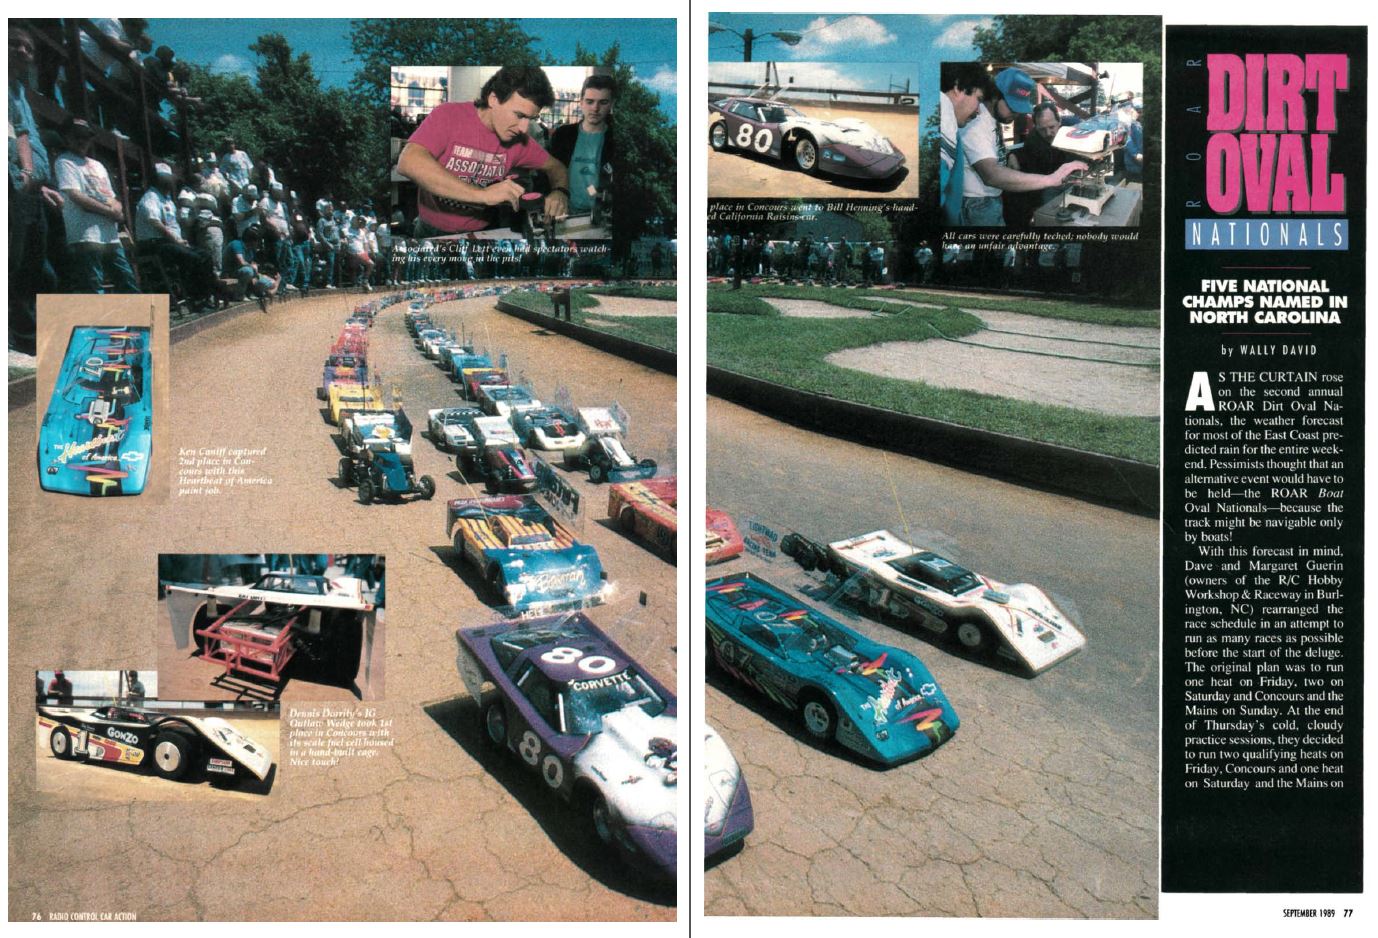 #TBT ROAR Dirt Oval Nationals featured in September 1989 Issue 